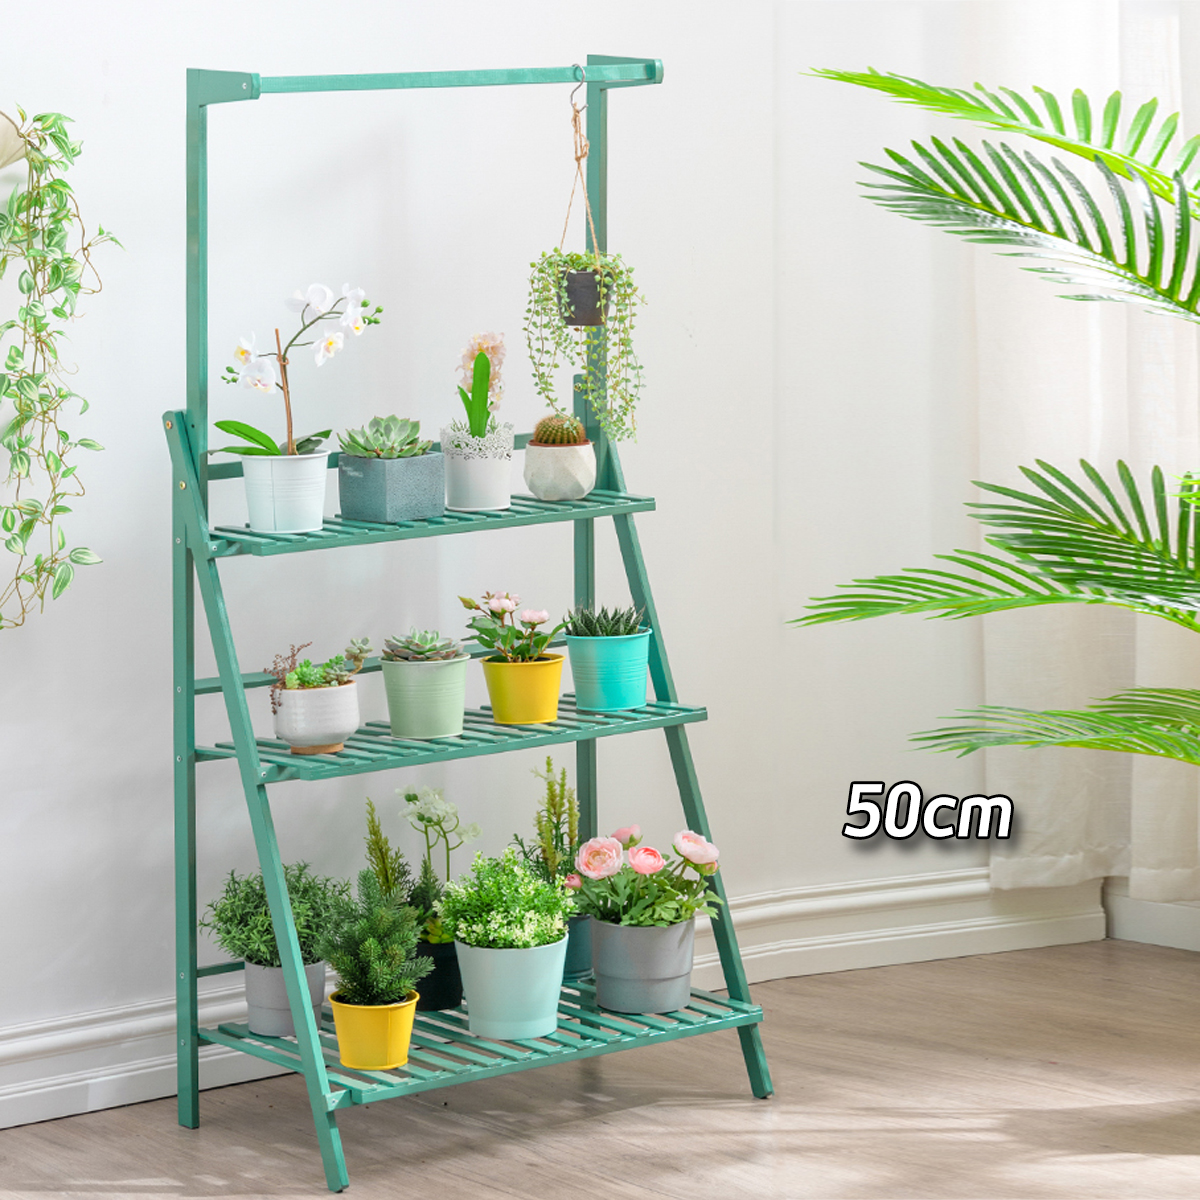 3-Tiers-Wood-Plant-Rack-Multi-layer-Flower-Pot-Stand-Wooden-Storage-Shelf-Display-Rack-Home-Office-G-1805397-6